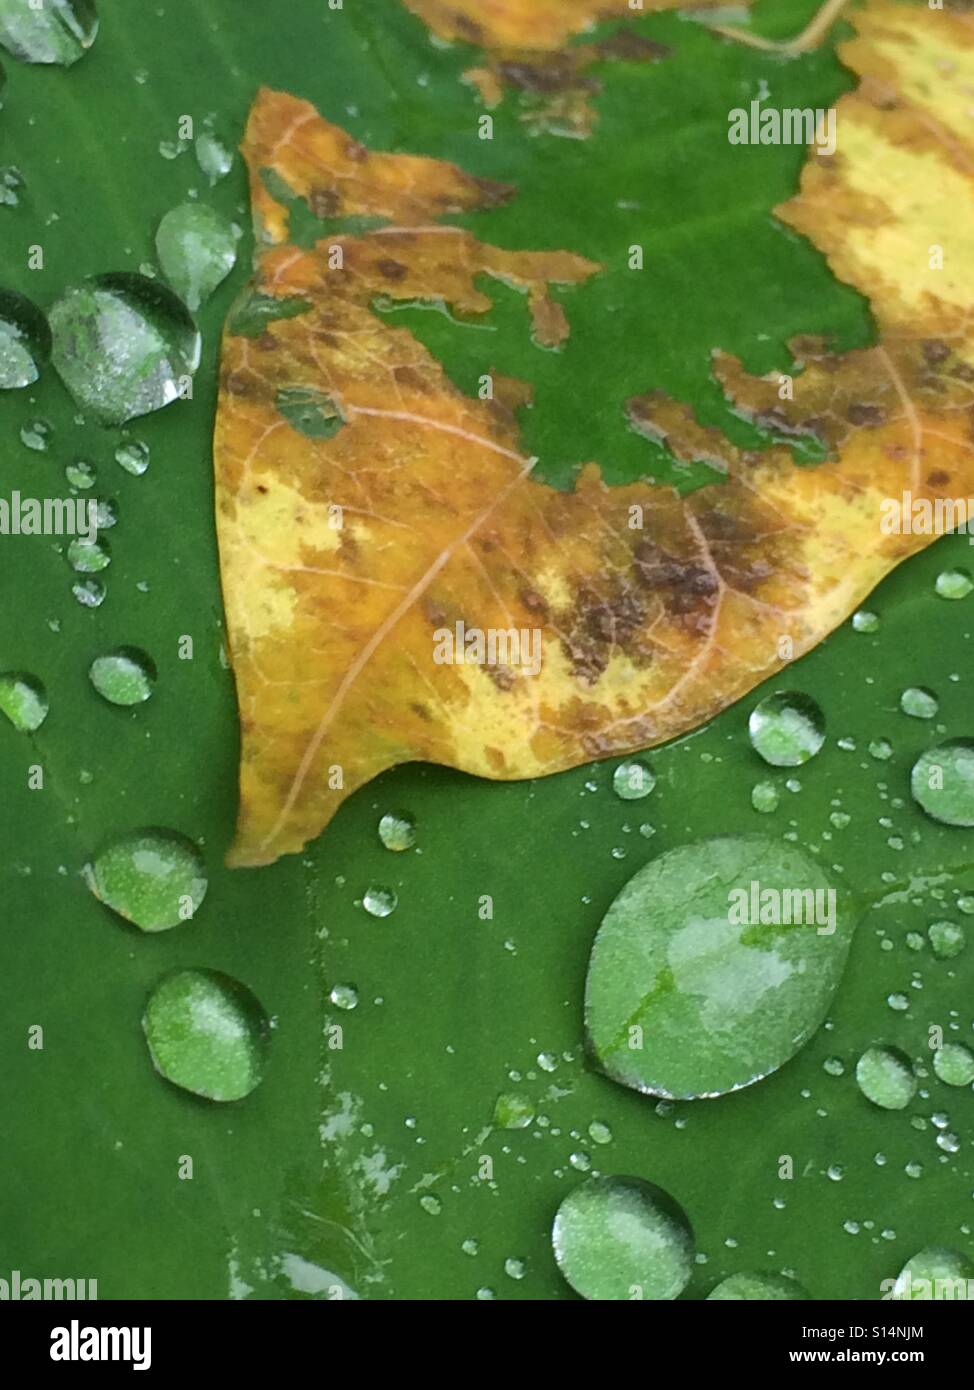 Rotting leaf surrounded by rain droplets. Stock Photo